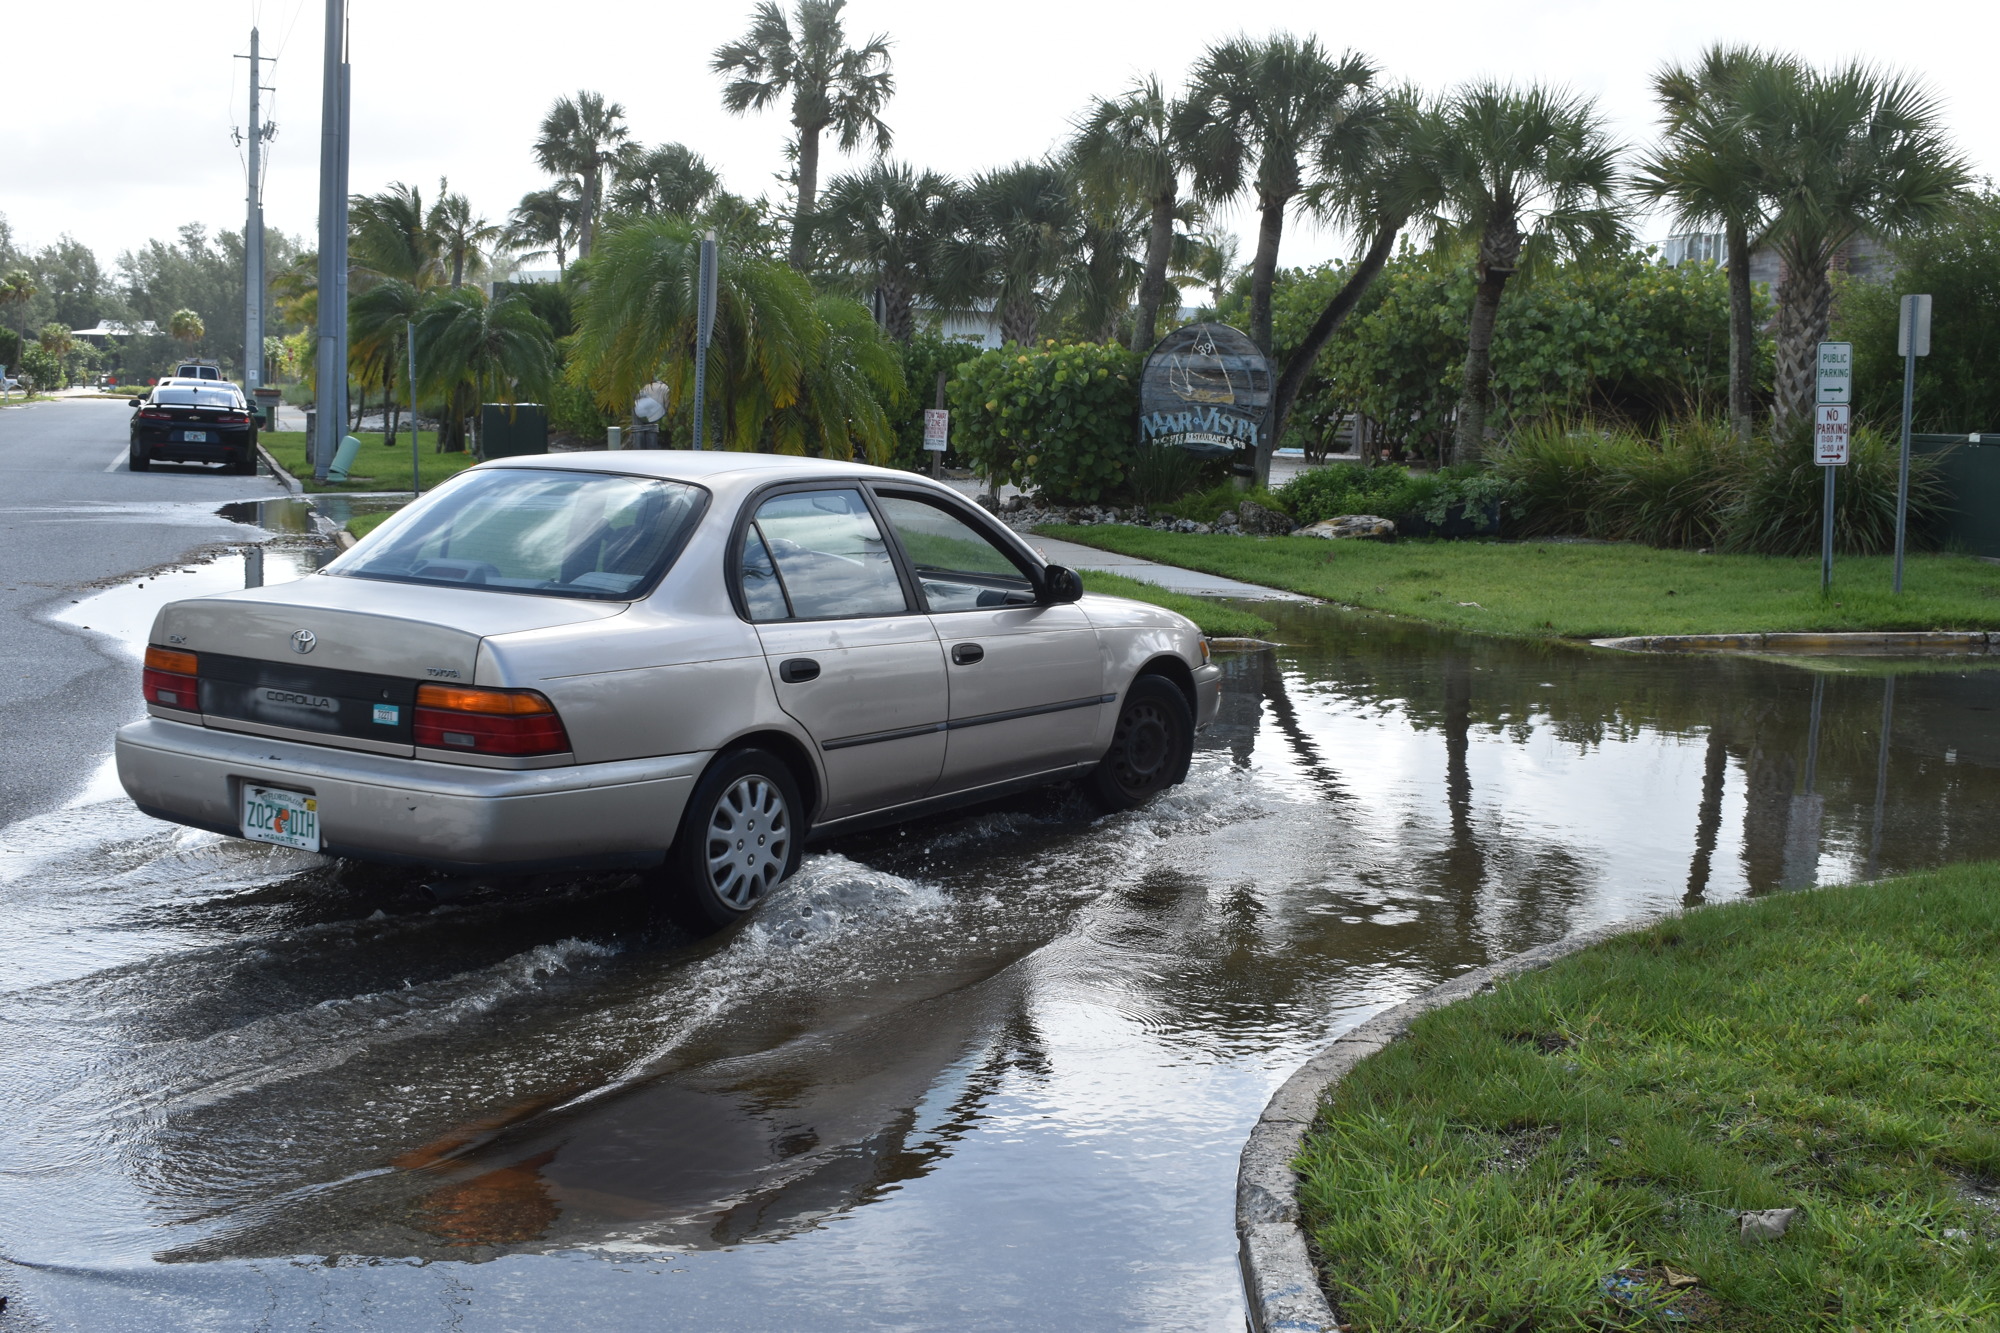 Water had accumulated on Wednesday morning at the intersection of Lois Avenue and Broadway in the Longbeach Village neighborhood near Mar Vista Dockside Restaurant .